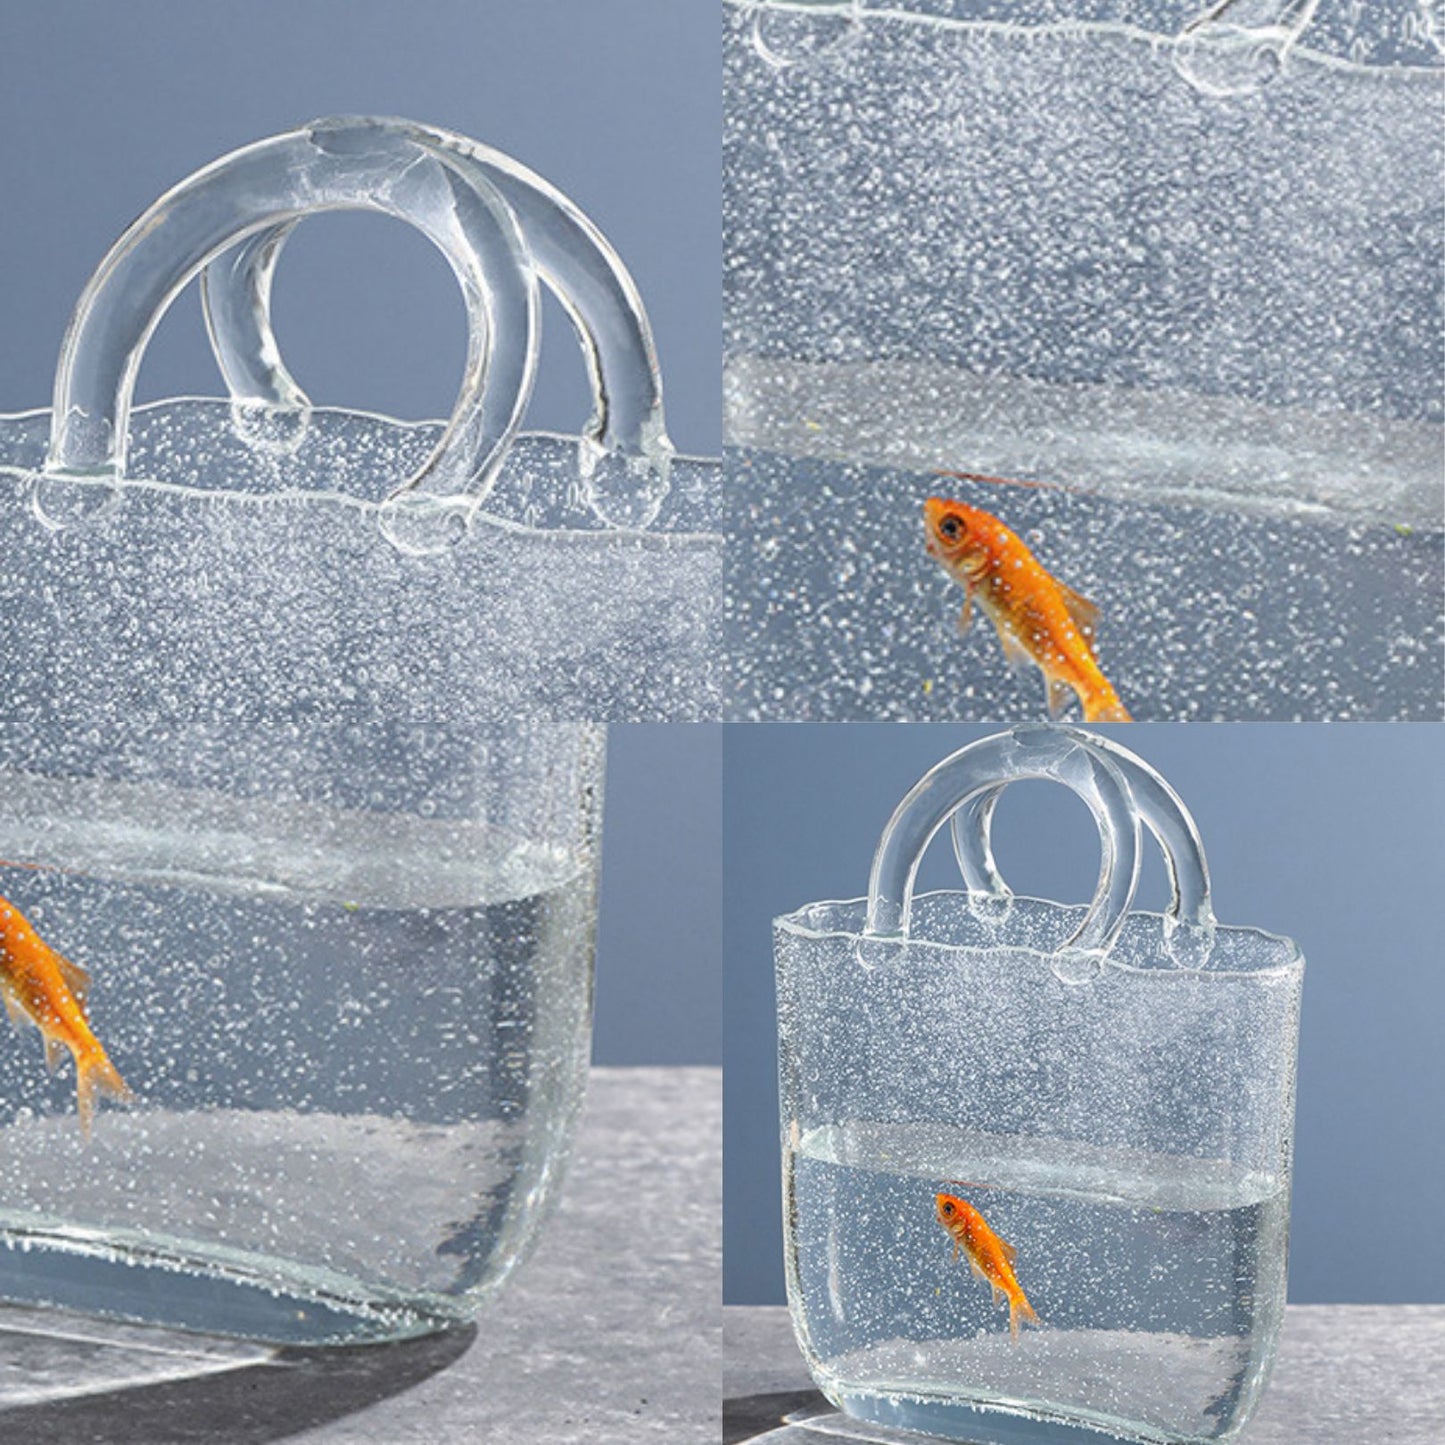 Handbag Shaped Glass Bag Vase with Fish Bowl Perfect for Home Decor and Events